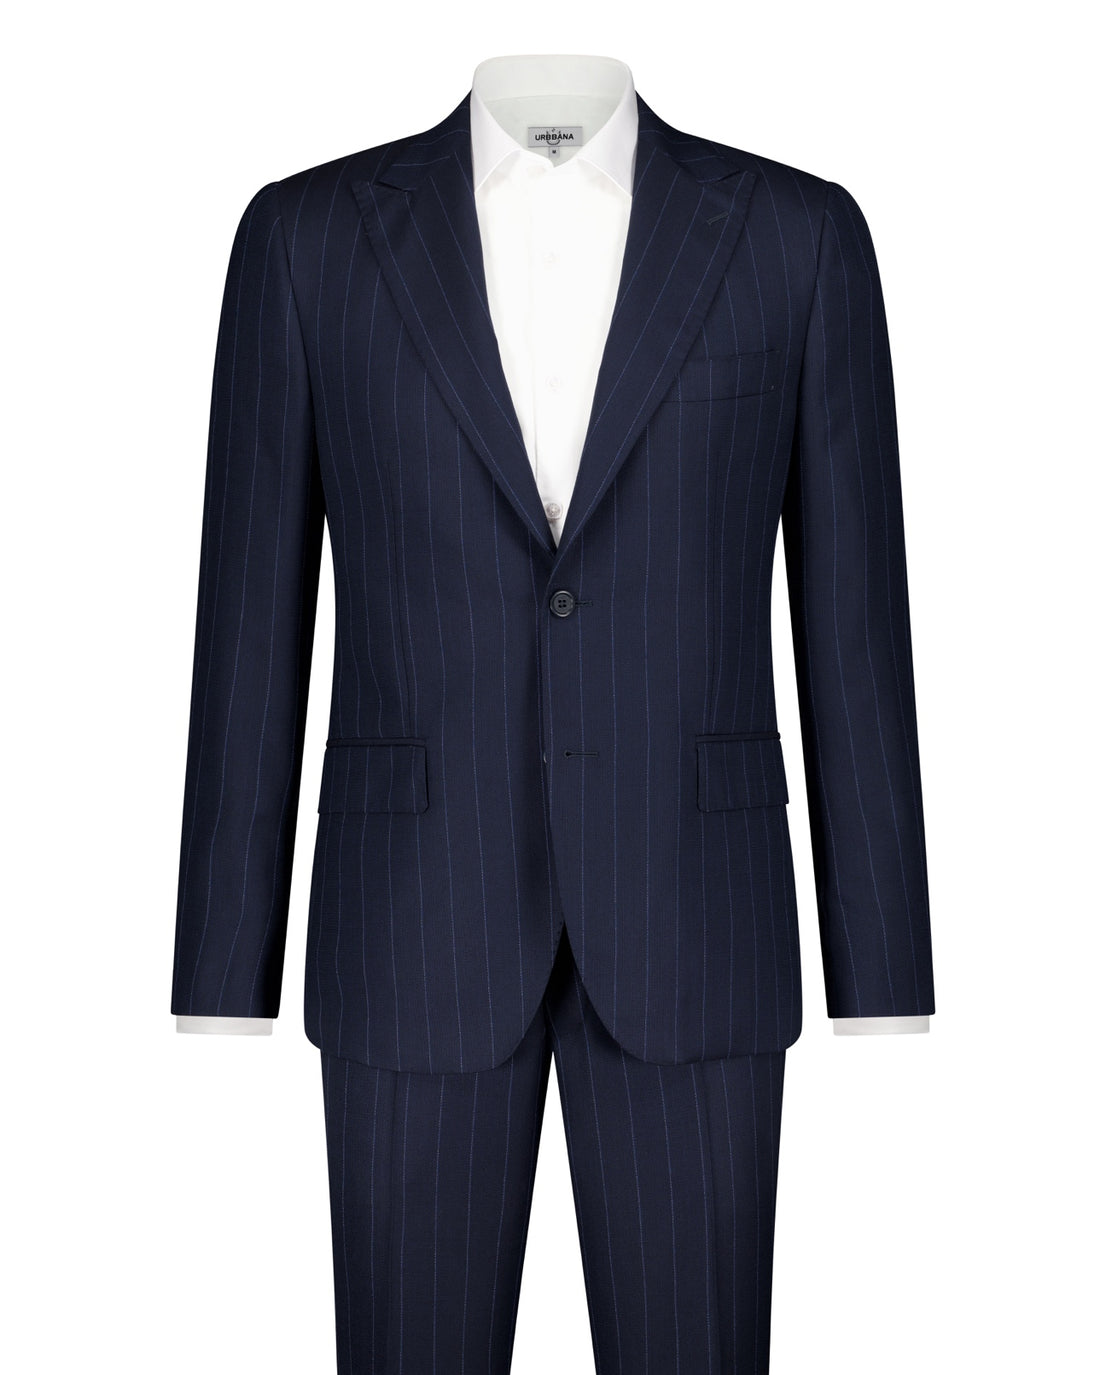 Corleone Zegna Cloth Suit - Navy - Made in Italy